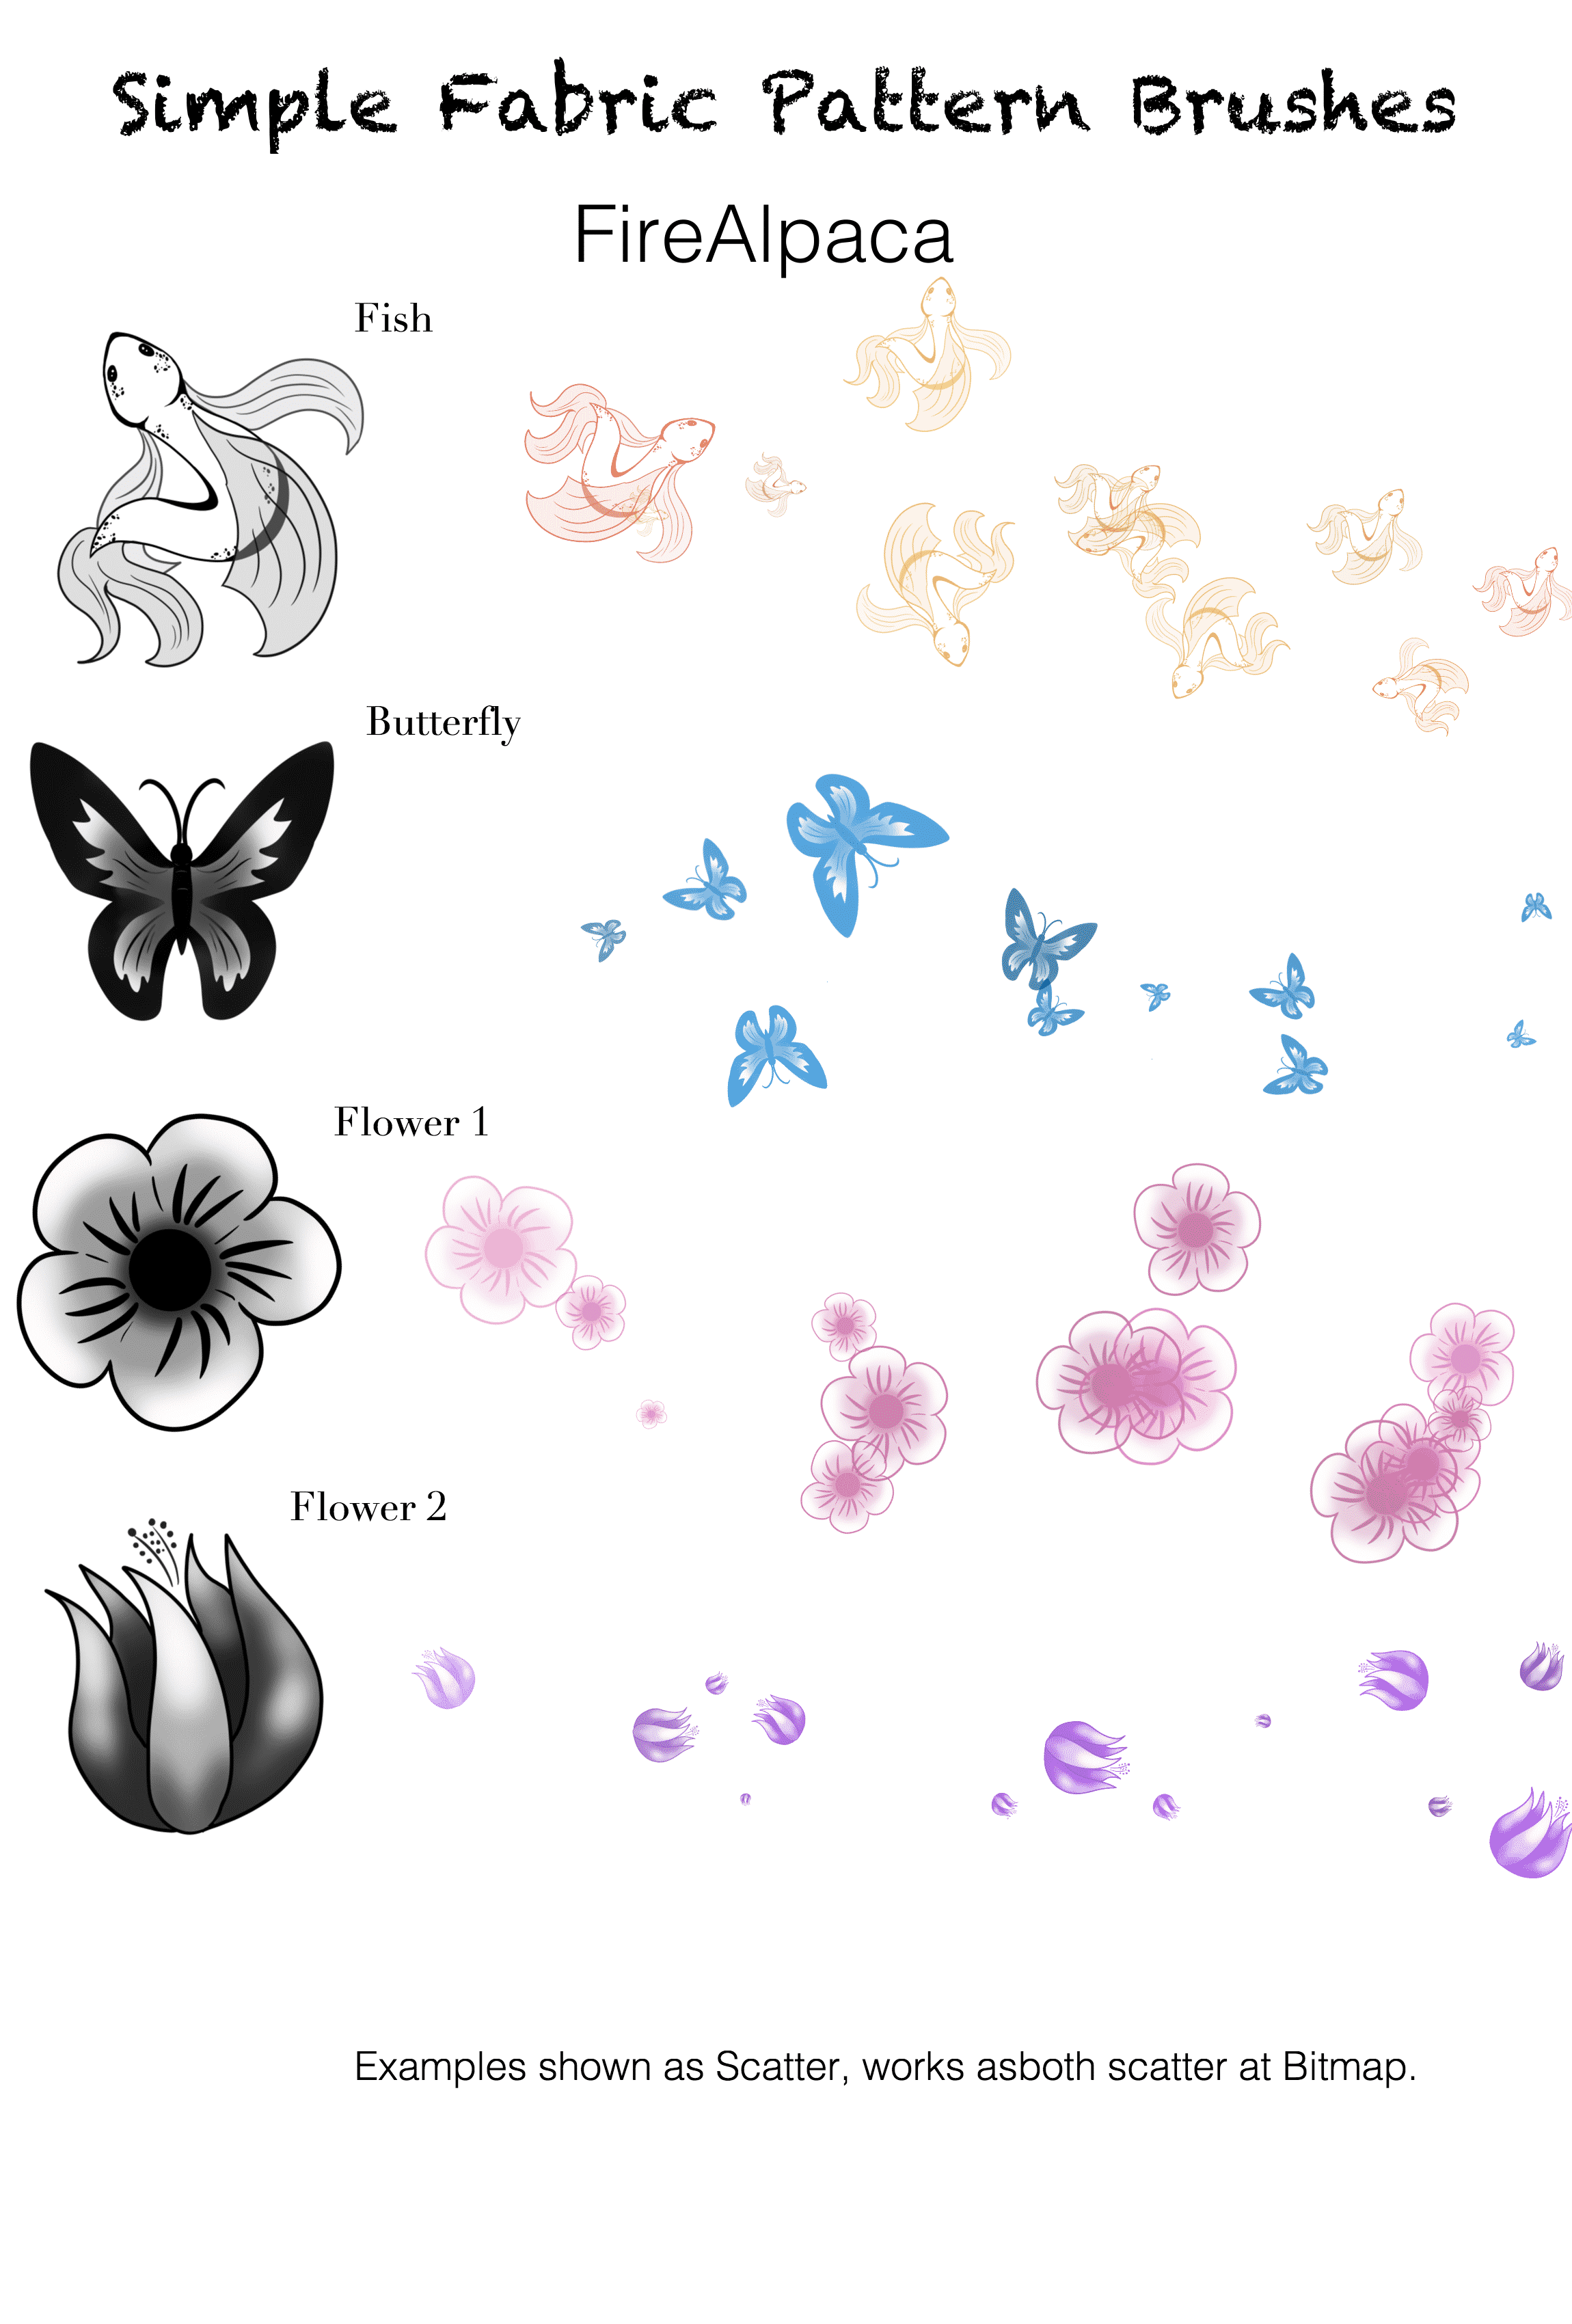 Simple Fabric Pattern Brushes